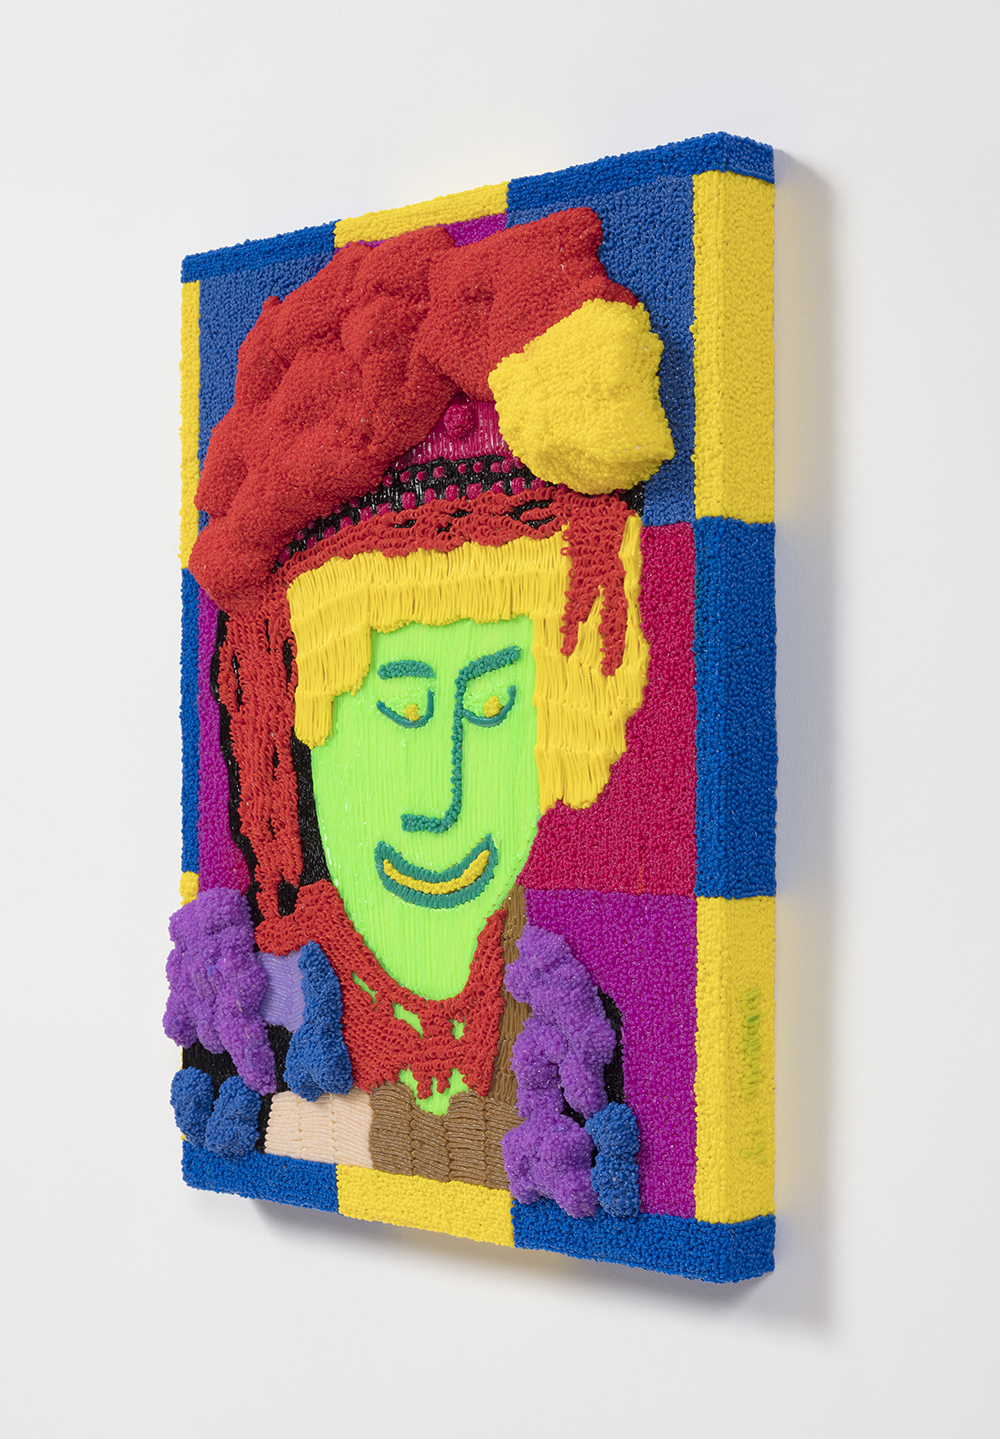 Dominic Dispirito. <em>The pearly witch of shoreditch</em>, 2018. Manually printed PLA plastic on board, 11 3/4 x 8 1/4 inches  (30 x 21 cm)